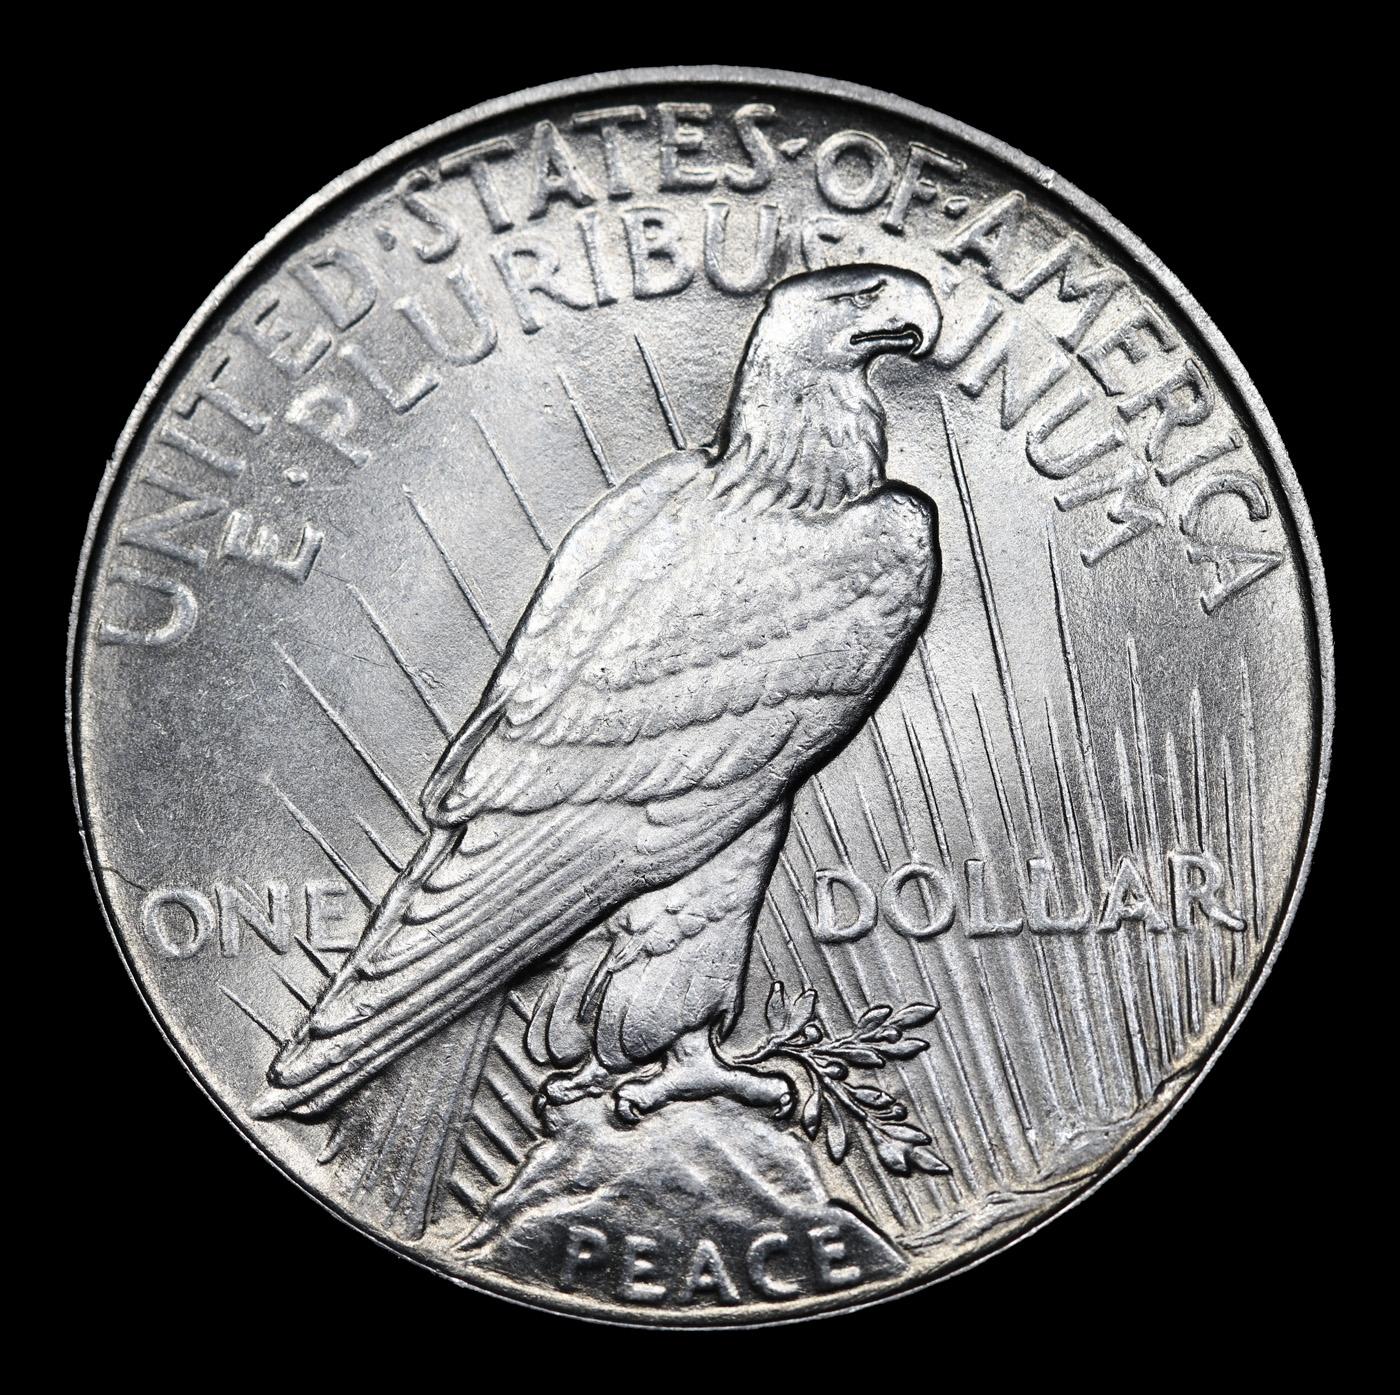 ***Auction Highlight*** 1934-p Peace Dollar $1 Graded ms65 By SEGS (fc)